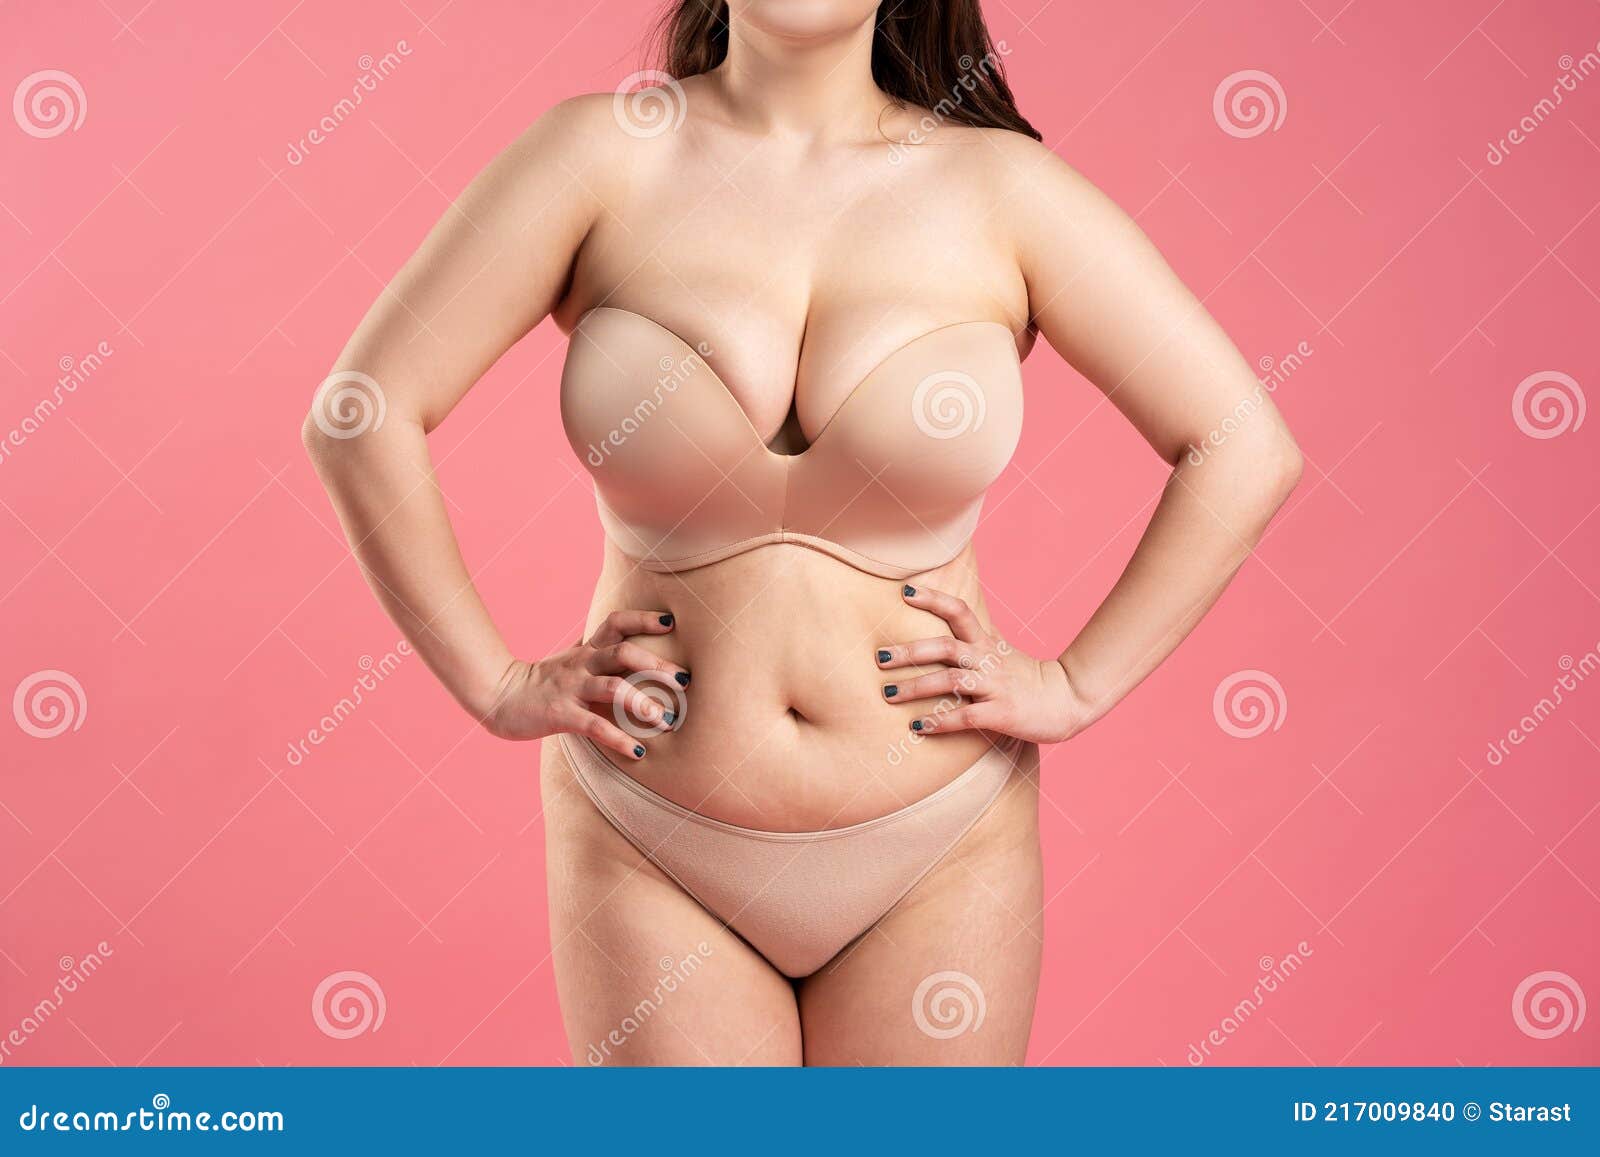 https://thumbs.dreamstime.com/z/fat-woman-large-breasts-push-up-bra-pink-background-overweight-female-body-fat-woman-large-breasts-push-up-217009840.jpg